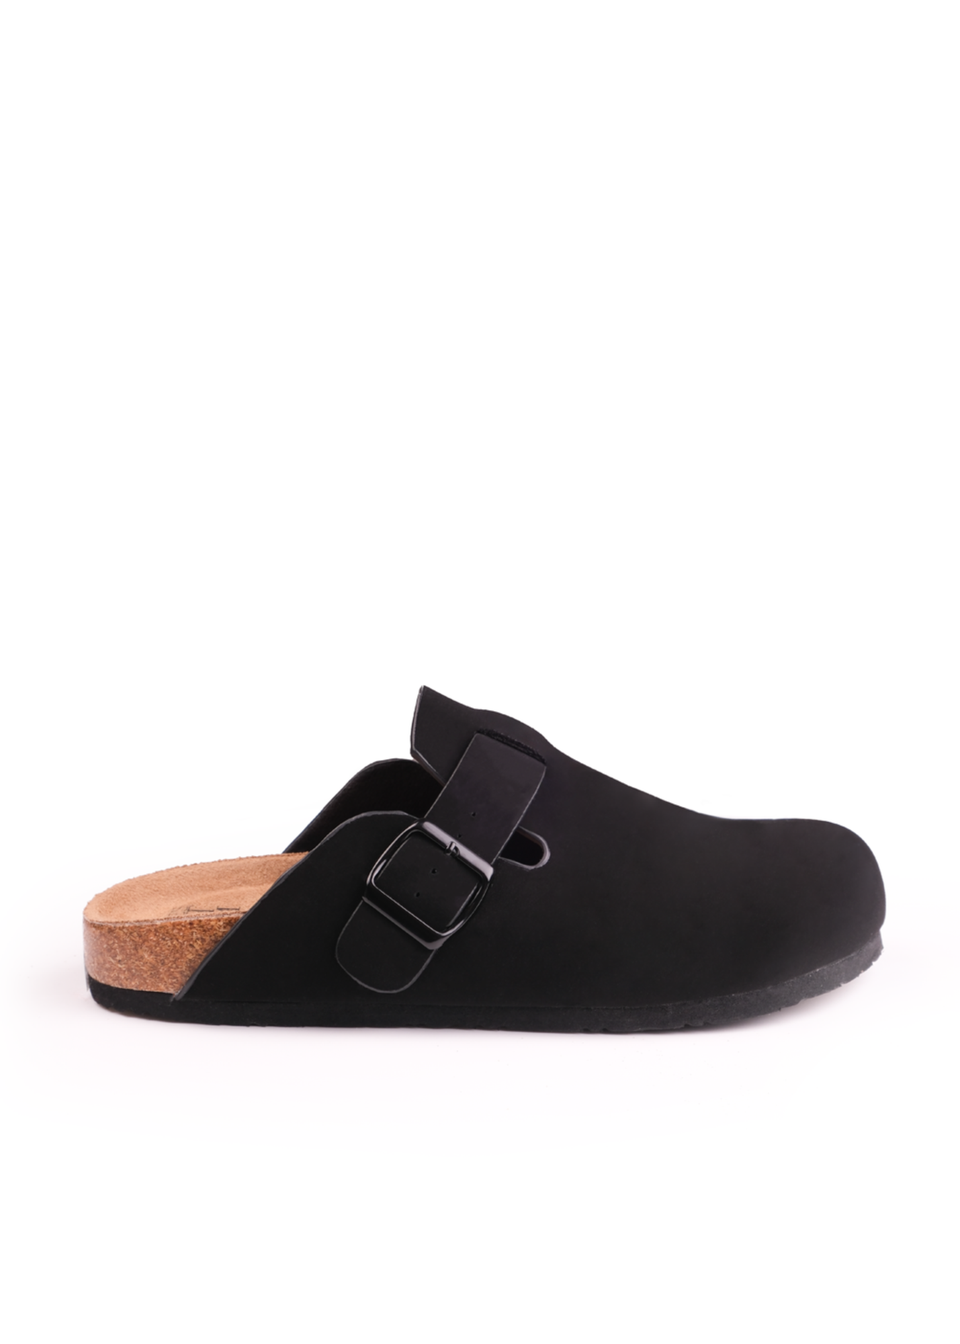 Where's That From Black Nubuck Palm Closed Toe Flat Sandals